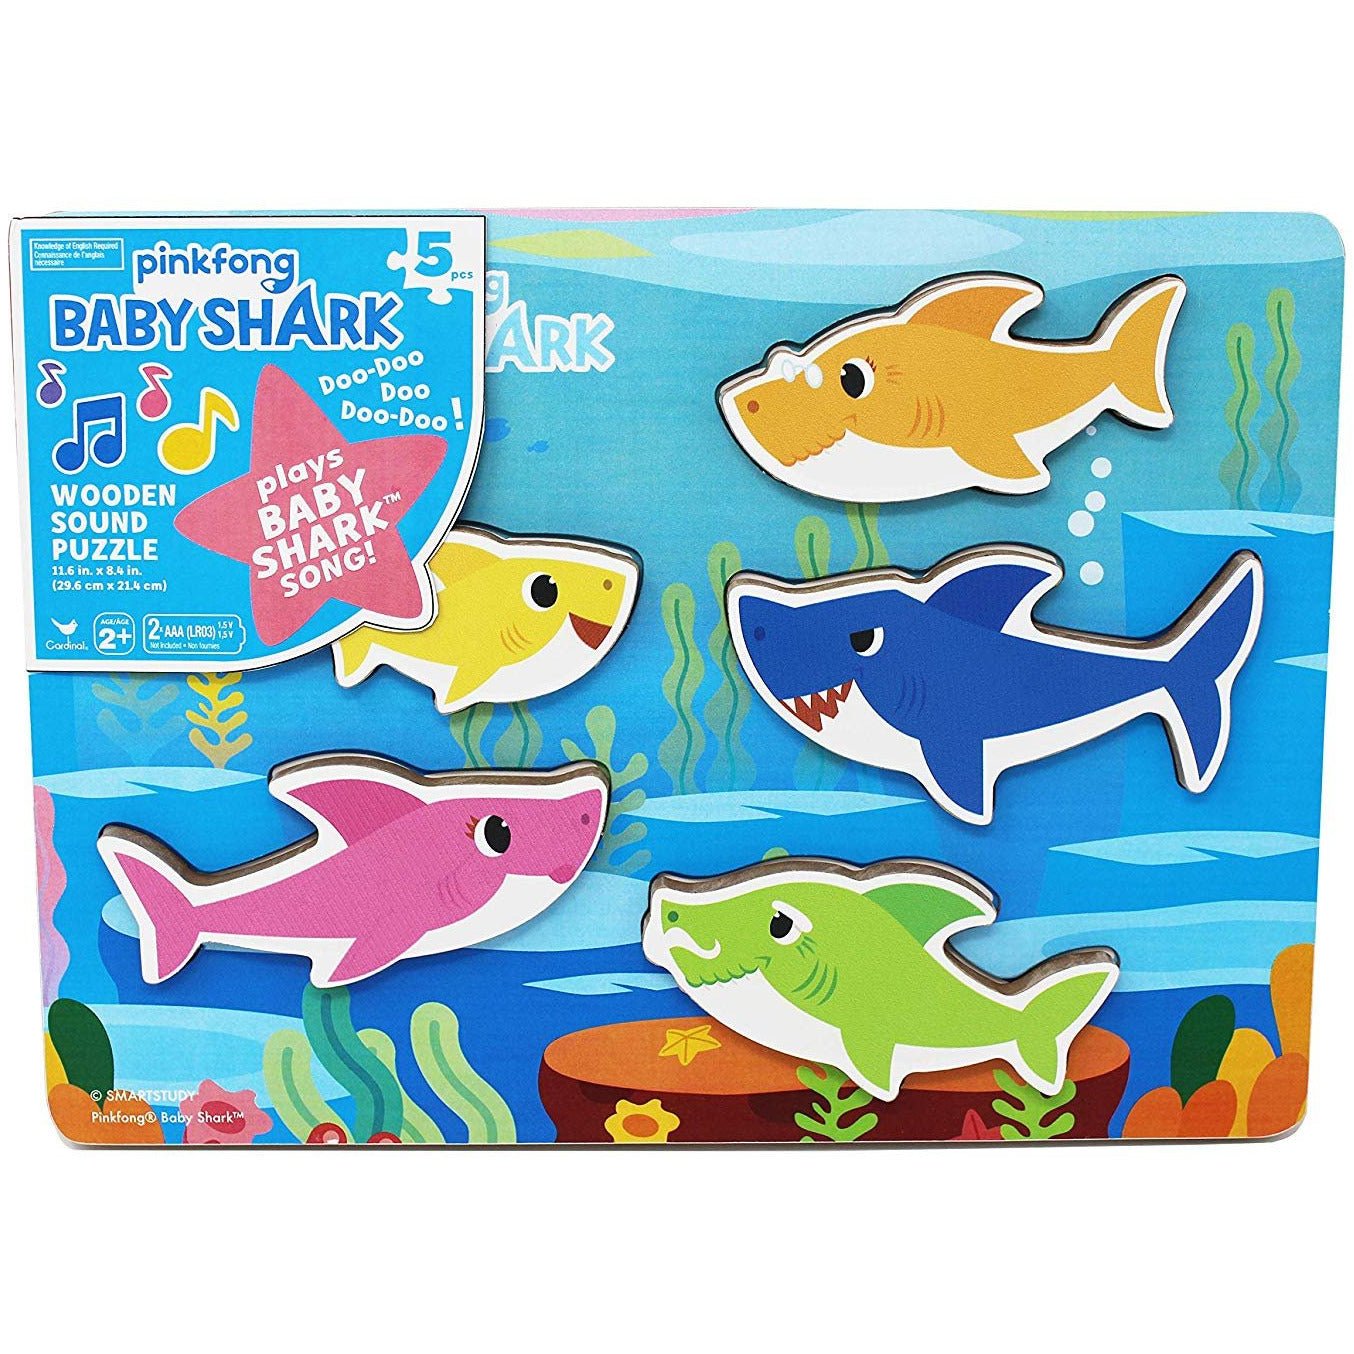 Pinkfong Baby Shark Chunky Wooden Sound Puzzle - Plays The Baby Shark Song